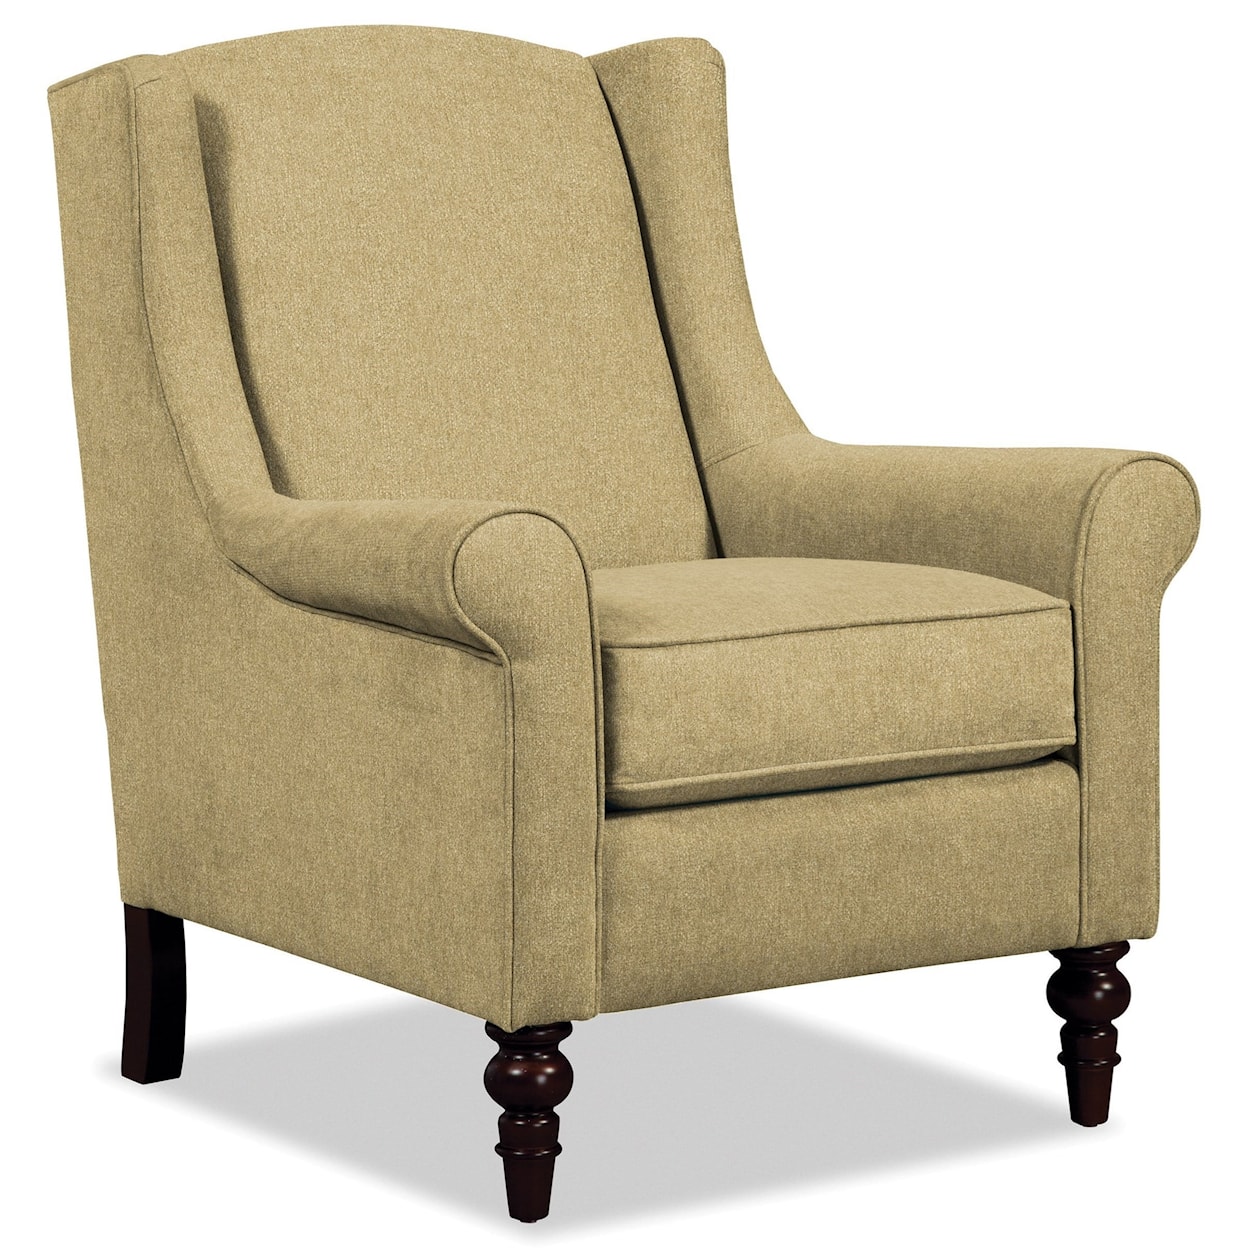 Hickorycraft 058710 Wing Back Chair